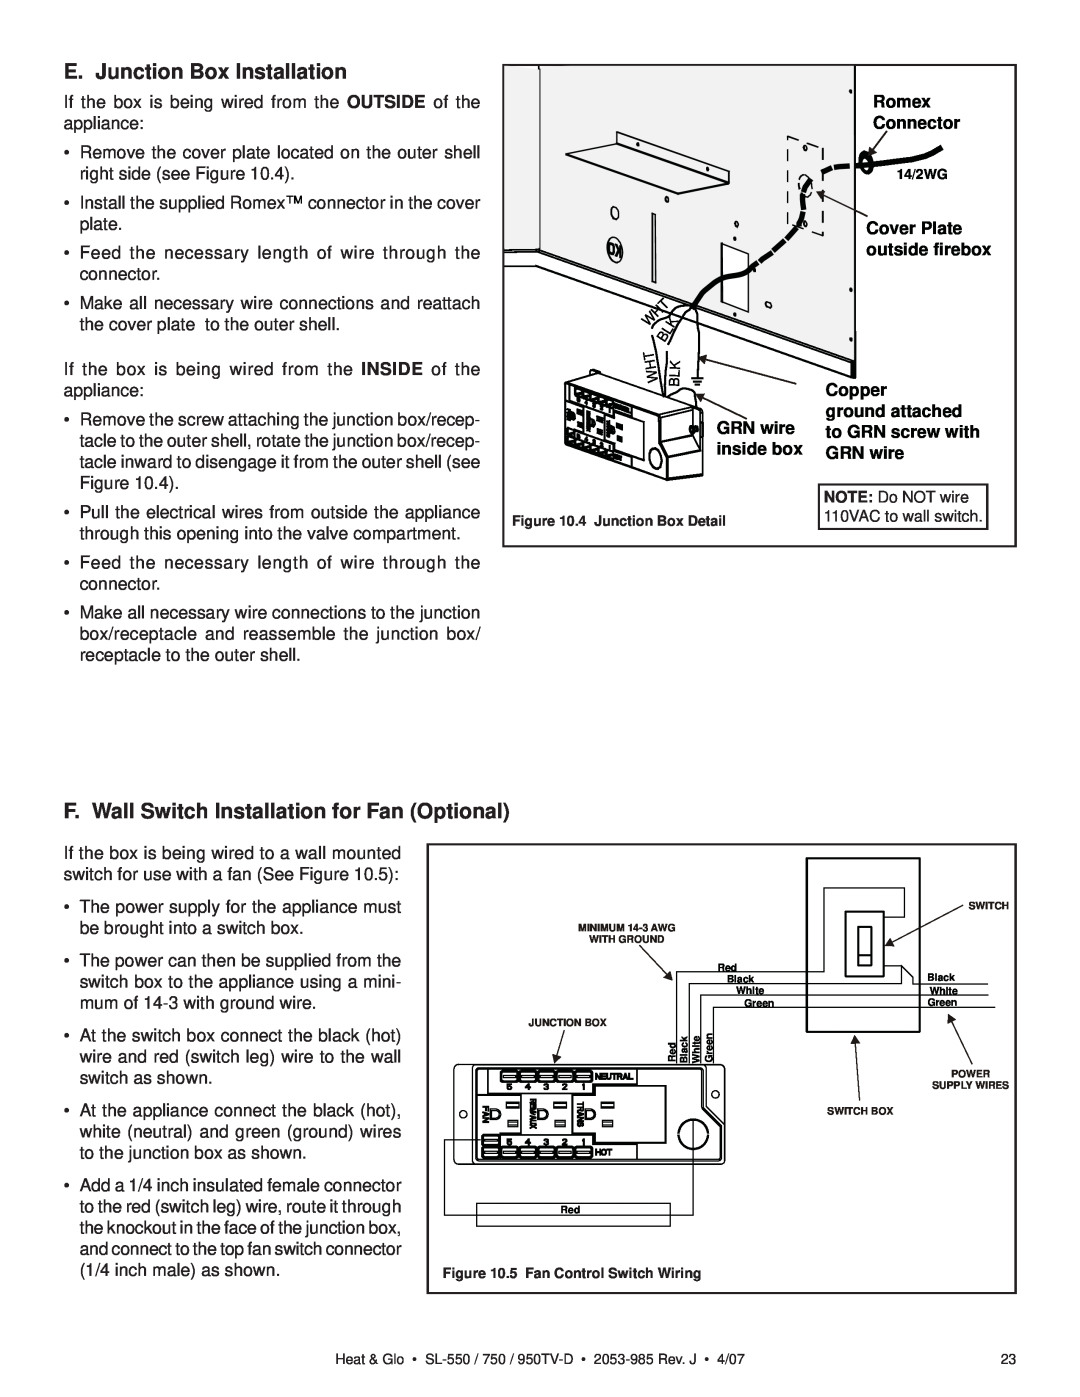 Heat & Glo LifeStyle SL-750TV-D E. Junction Box Installation, F. Wall Switch Installation for Fan Optional, Romex, Copper 